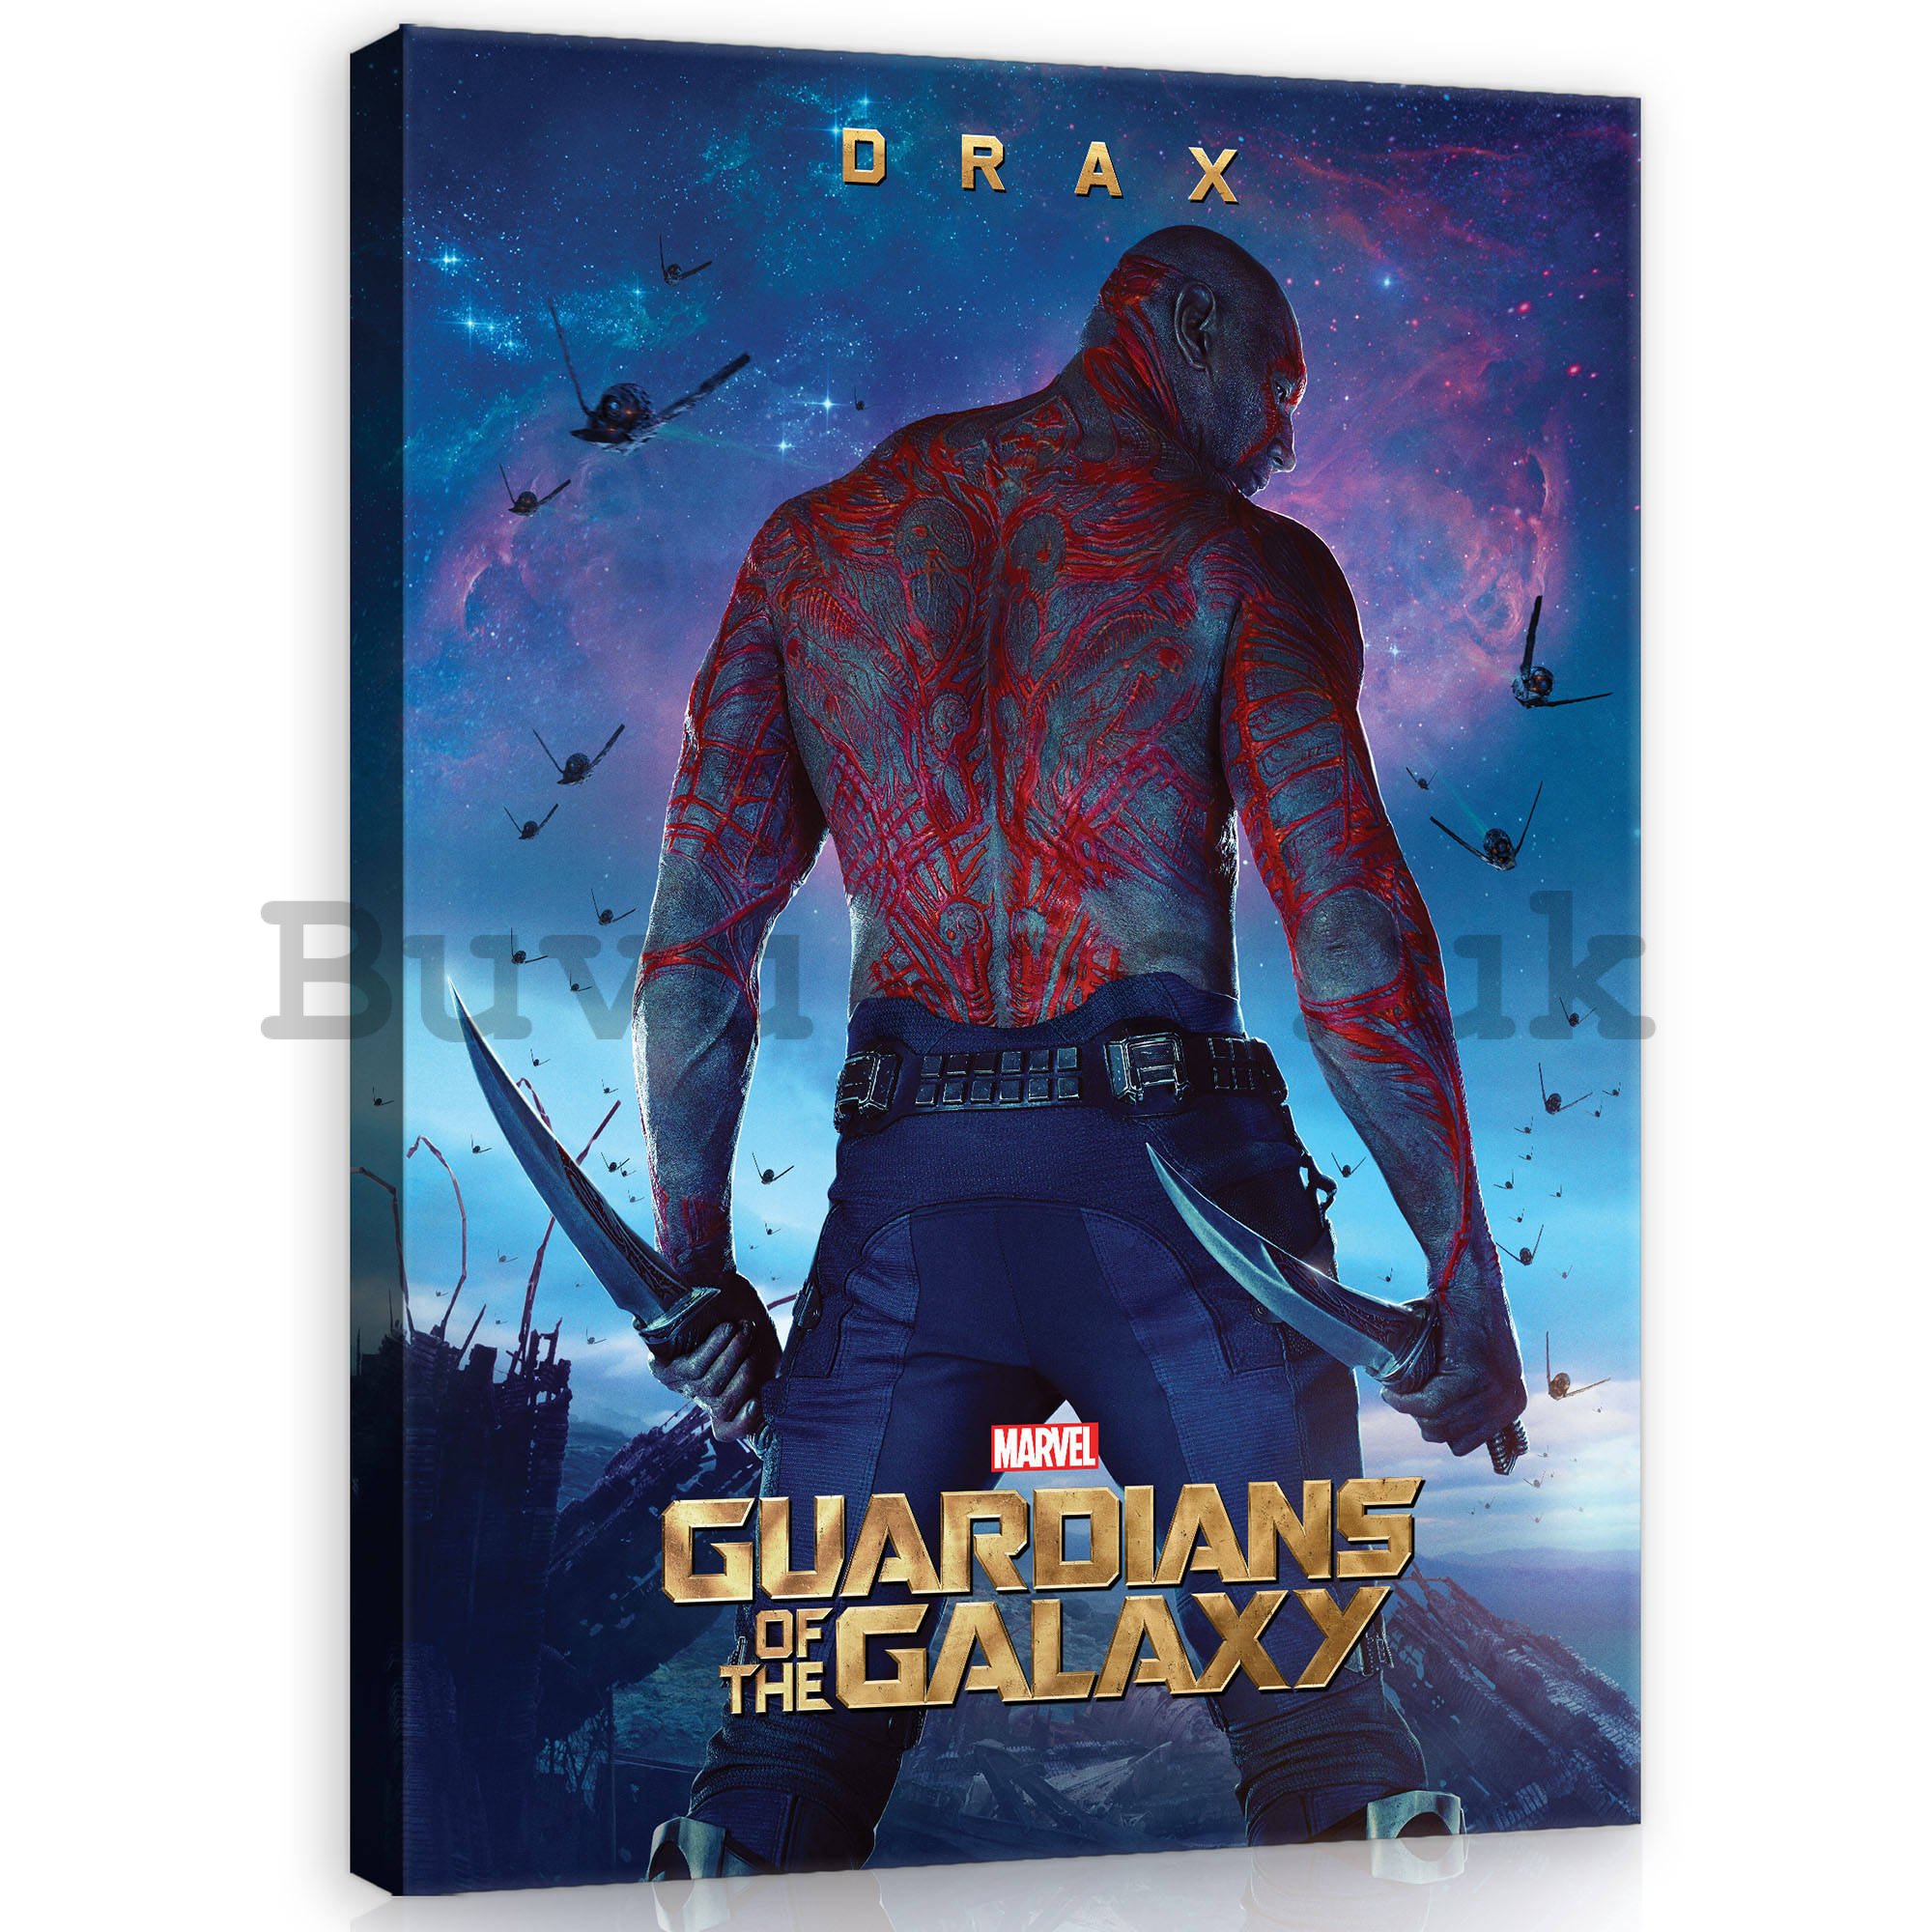 Painting on canvas: Guardians of The Galaxy Drax - 75x100 cm